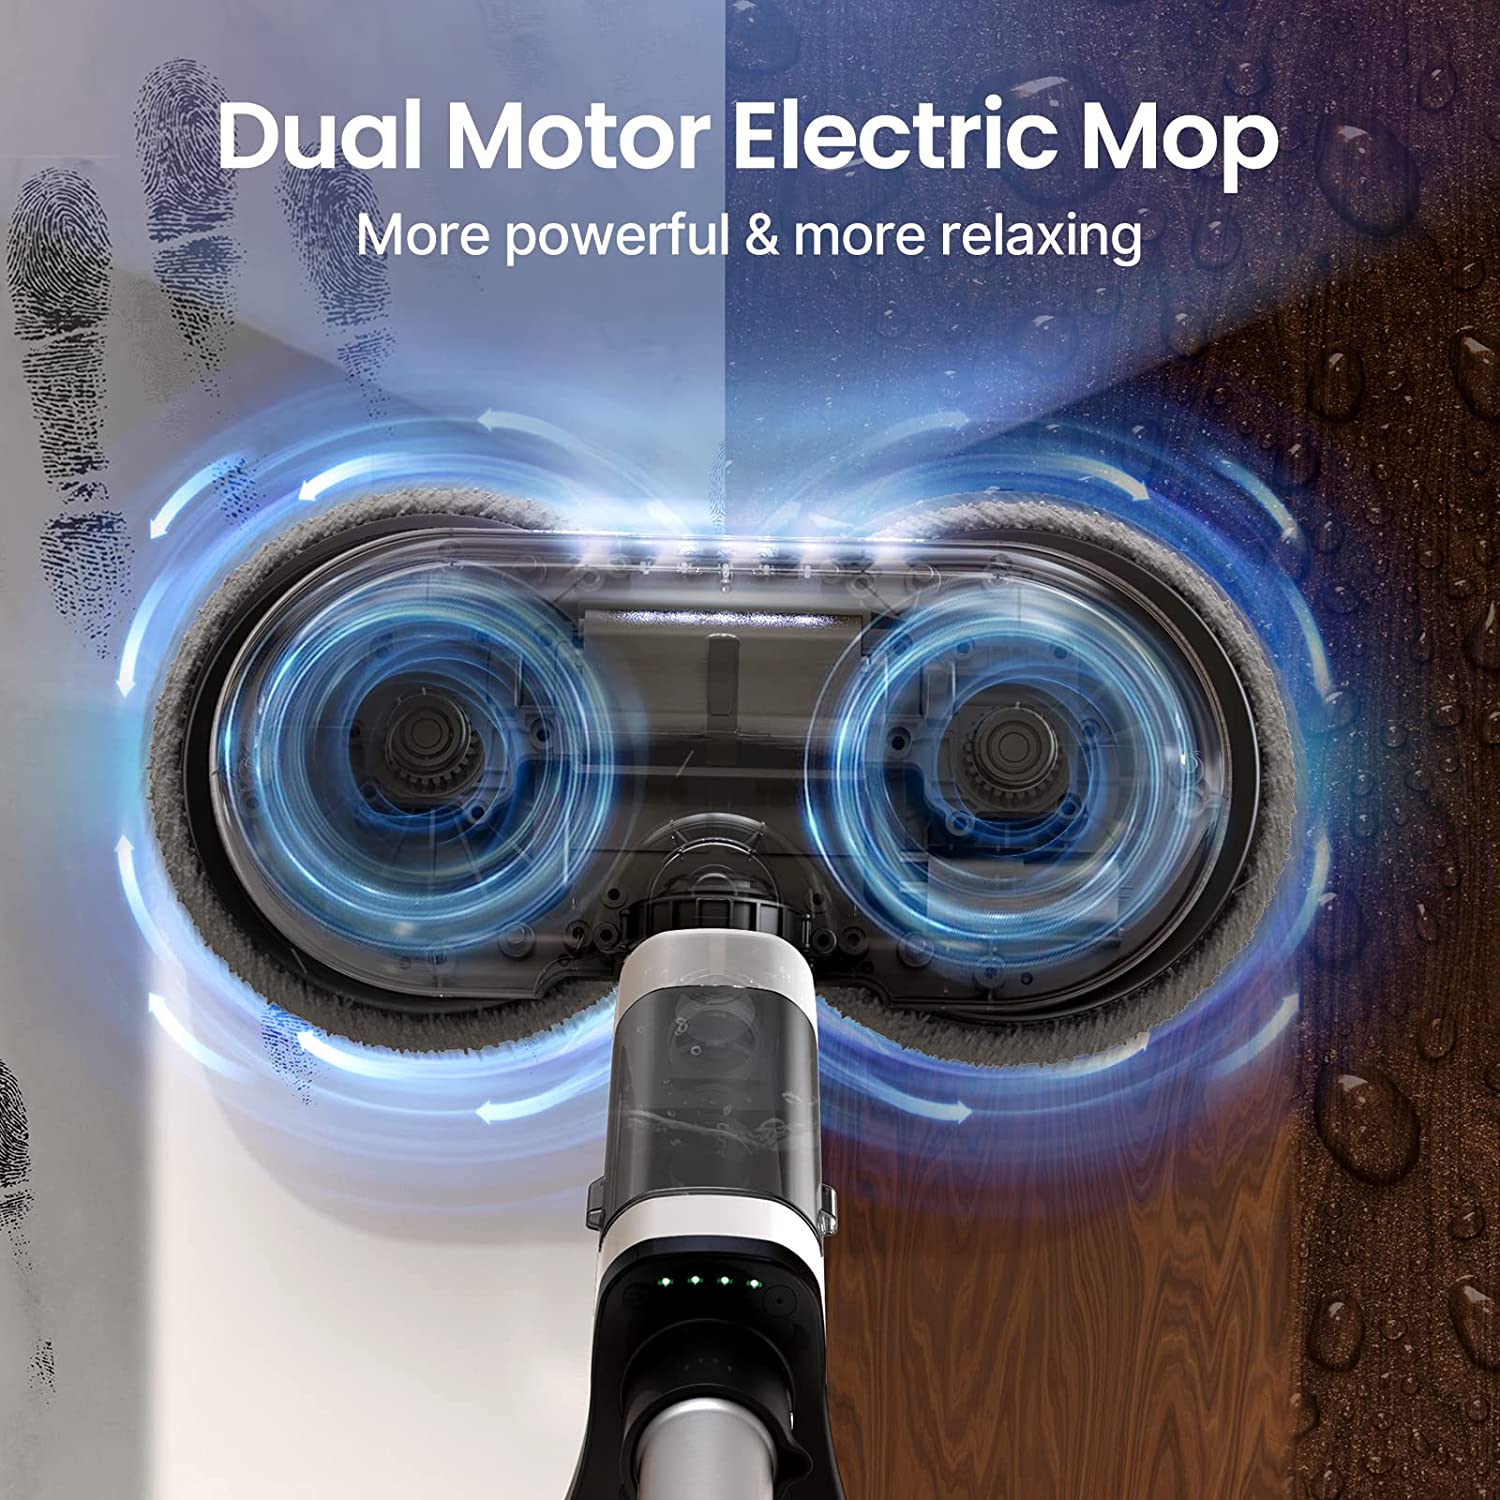  Cordless Electric Mop, Electric Spin Mop with LED Headlight and  Water Spray, Up to 60 mins Powerful Floor Cleaner with 300ml Water Tank,  Polisher for Hardwood, Tile Floors, Quiet Cleaning 